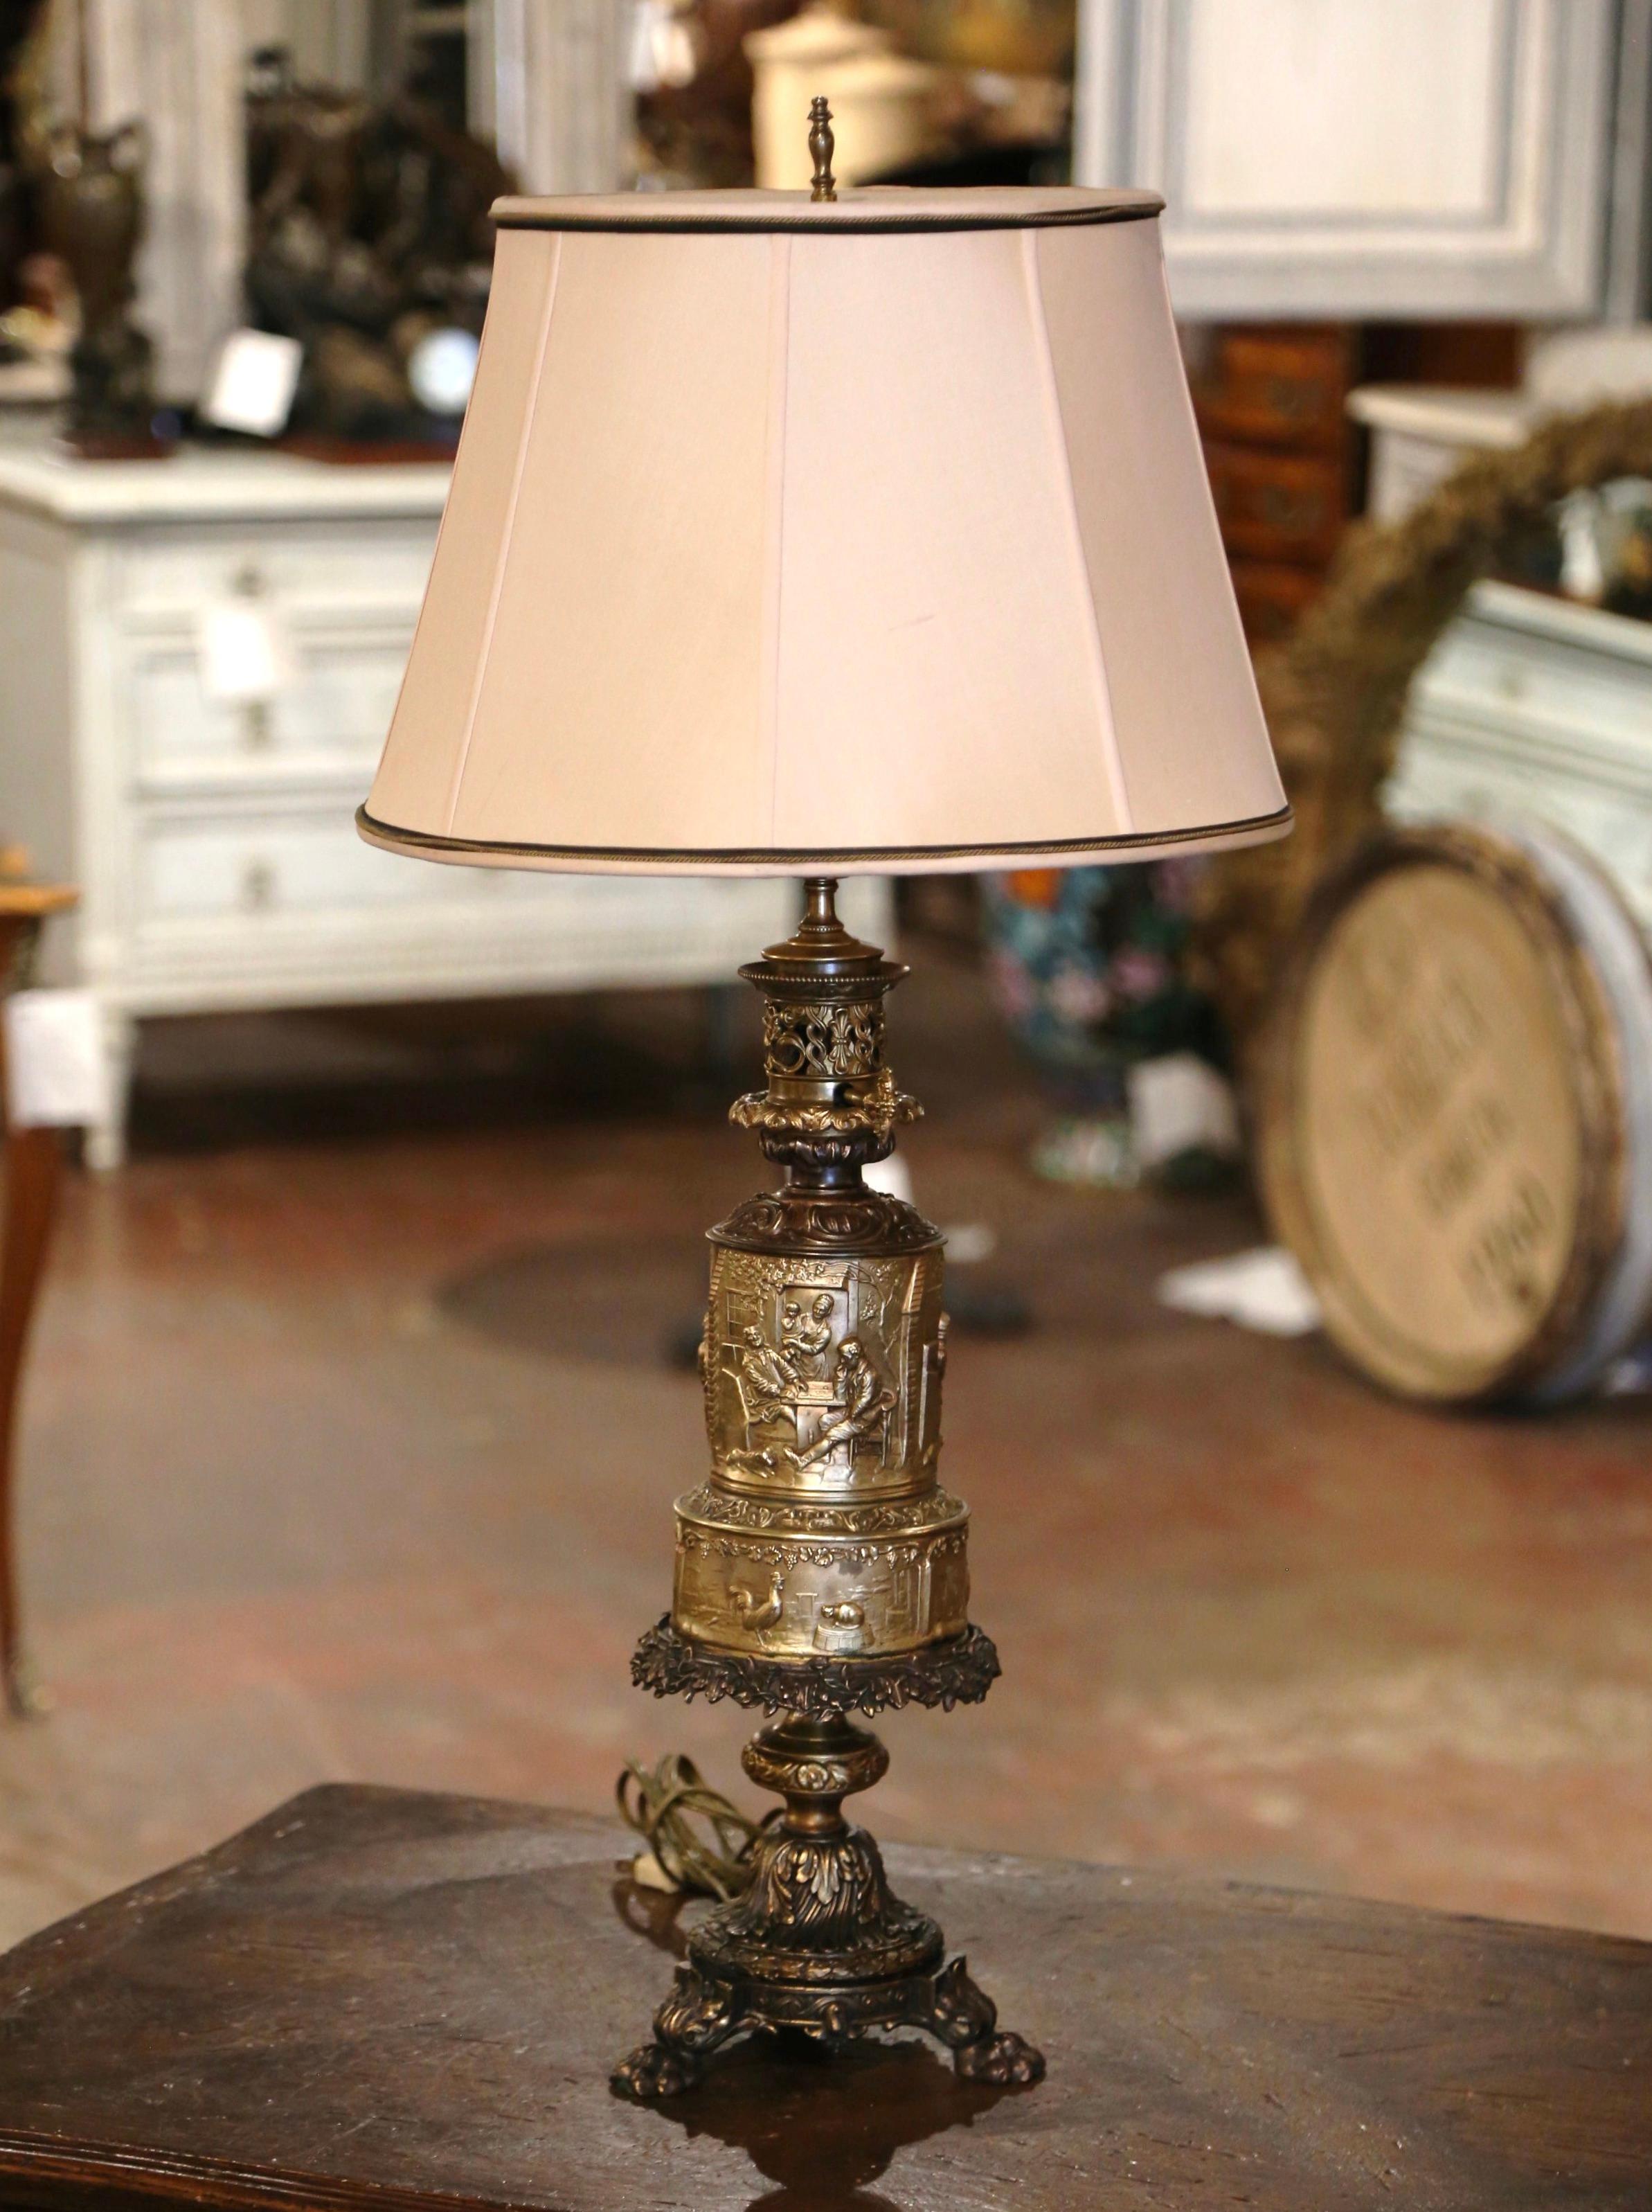  19th Century French Repousse Brass Oil Table Lamp with Tavern Scenes  In Excellent Condition For Sale In Dallas, TX